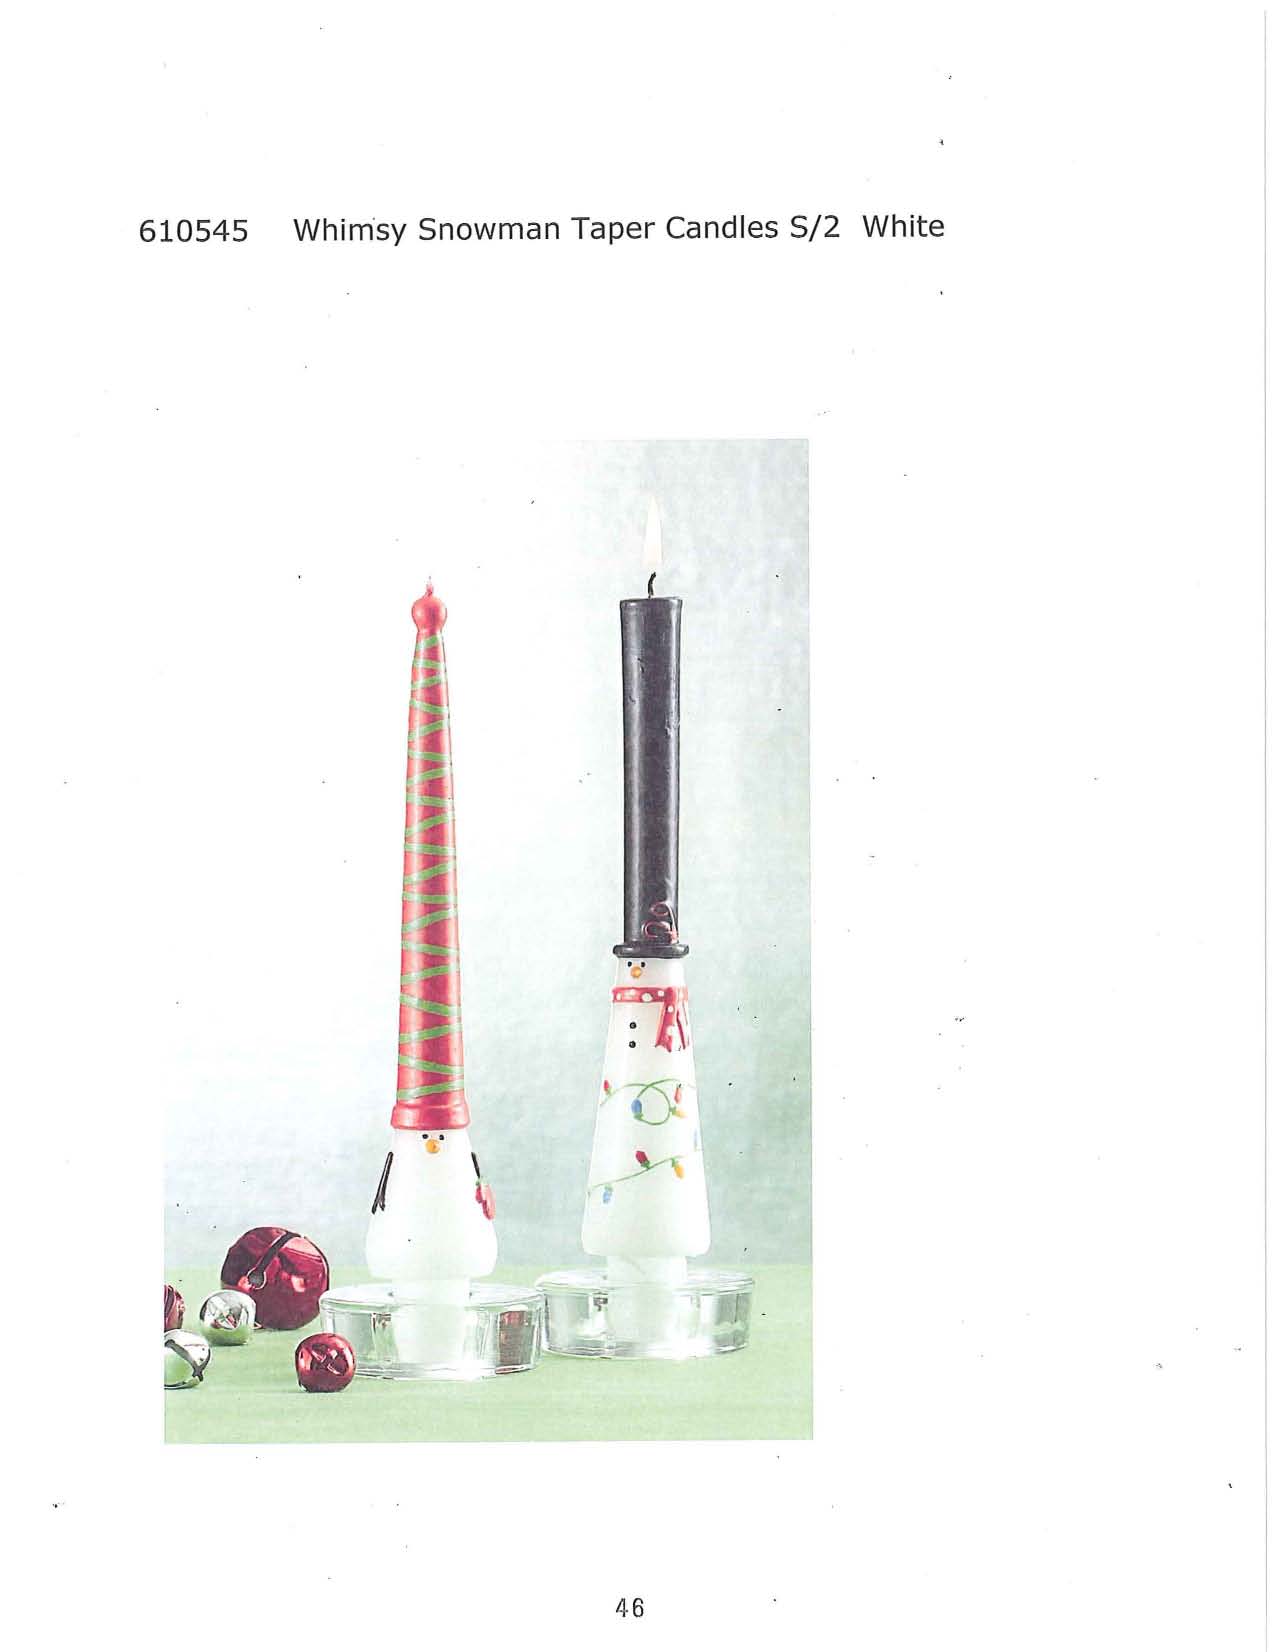 Whimsy Snowman Taper Candles s/2 - White